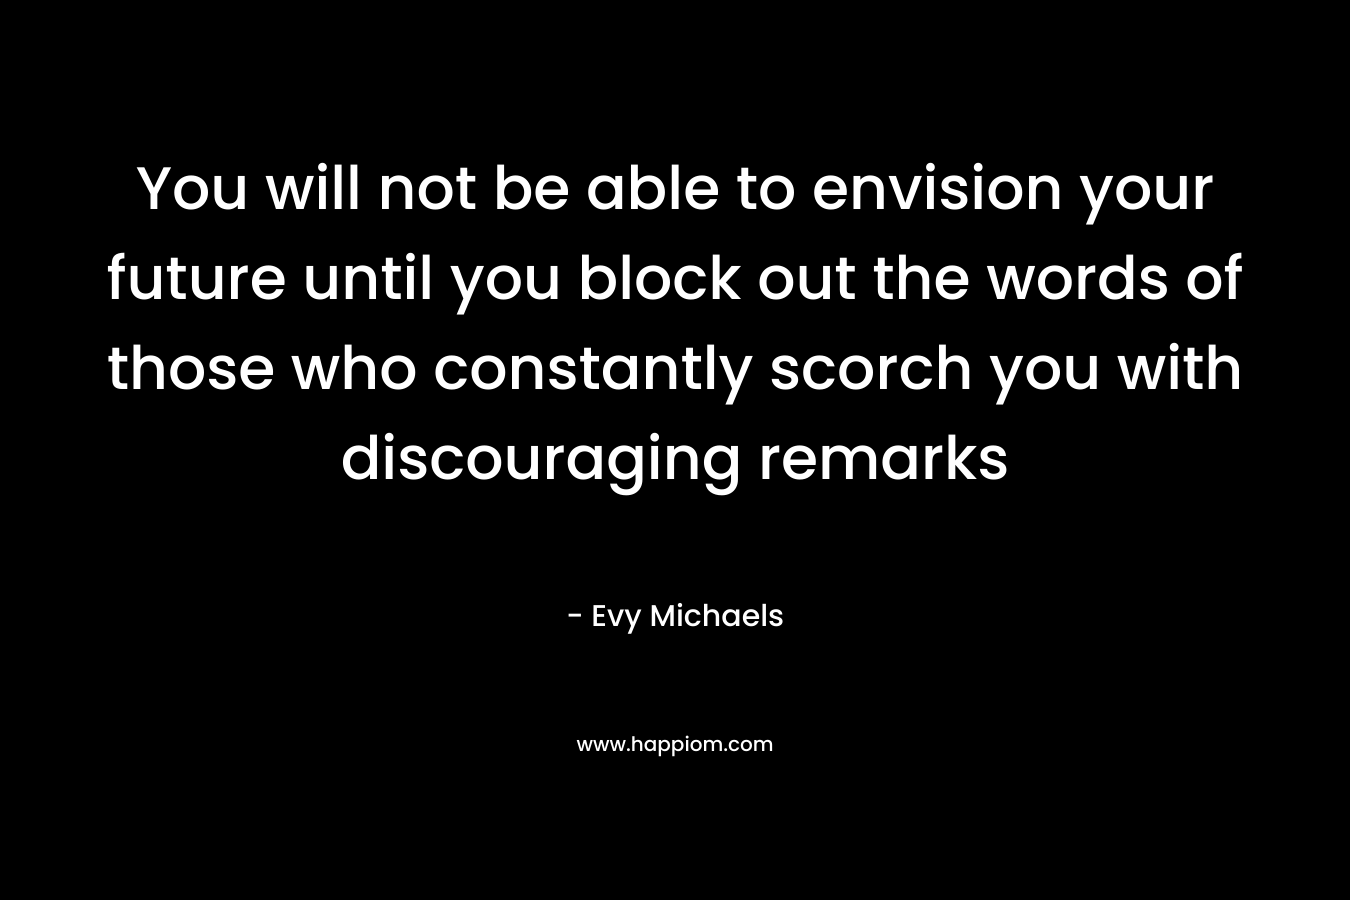 You will not be able to envision your future until you block out the words of those who constantly scorch you with discouraging remarks – Evy Michaels